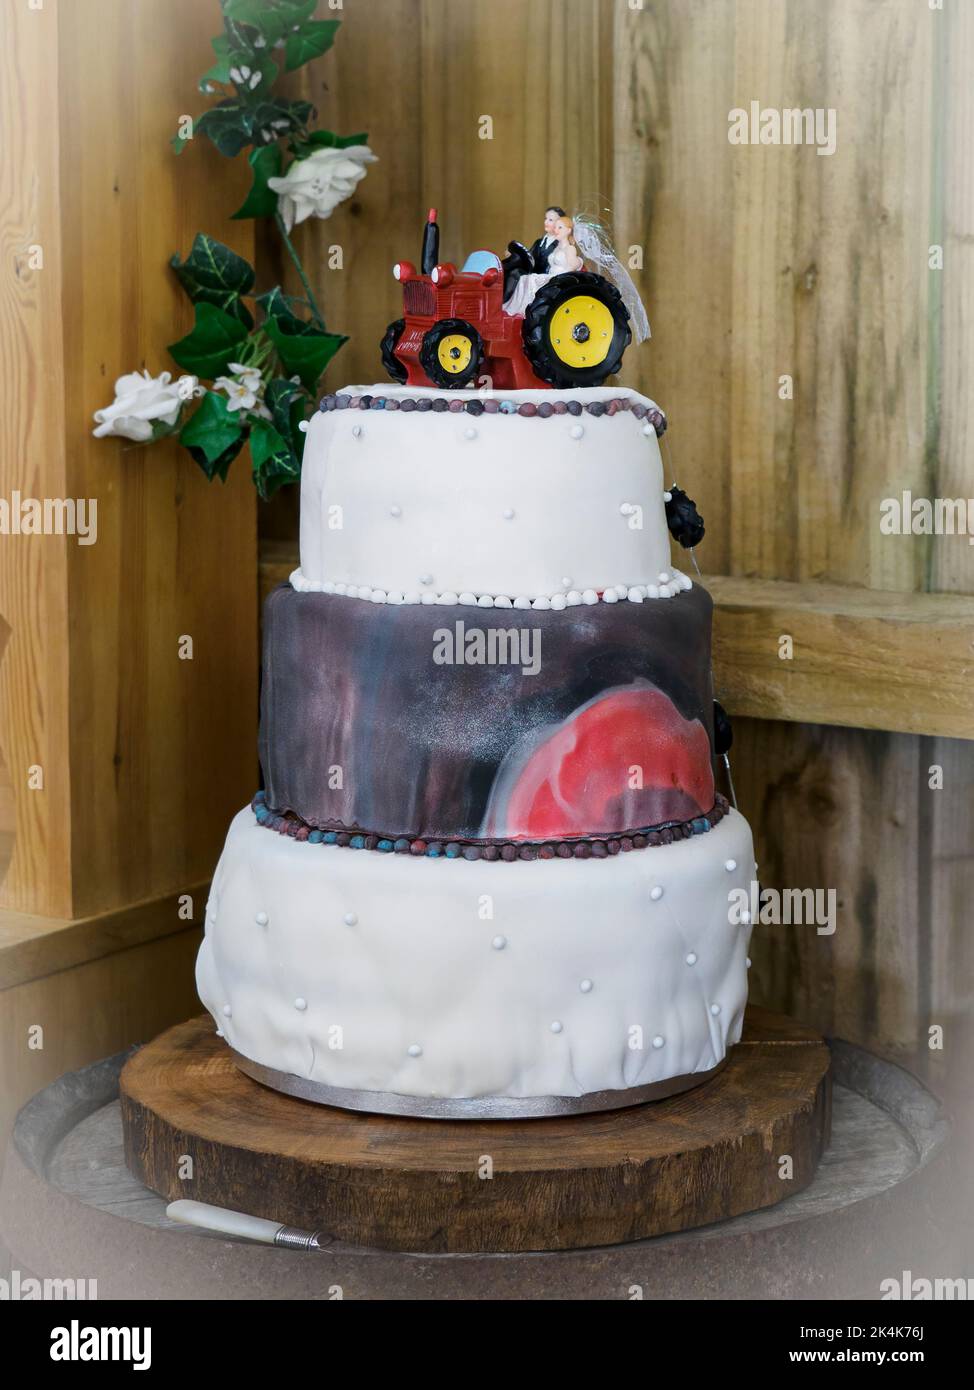 Wedding cake with a tractor on top, UK Stock Photo